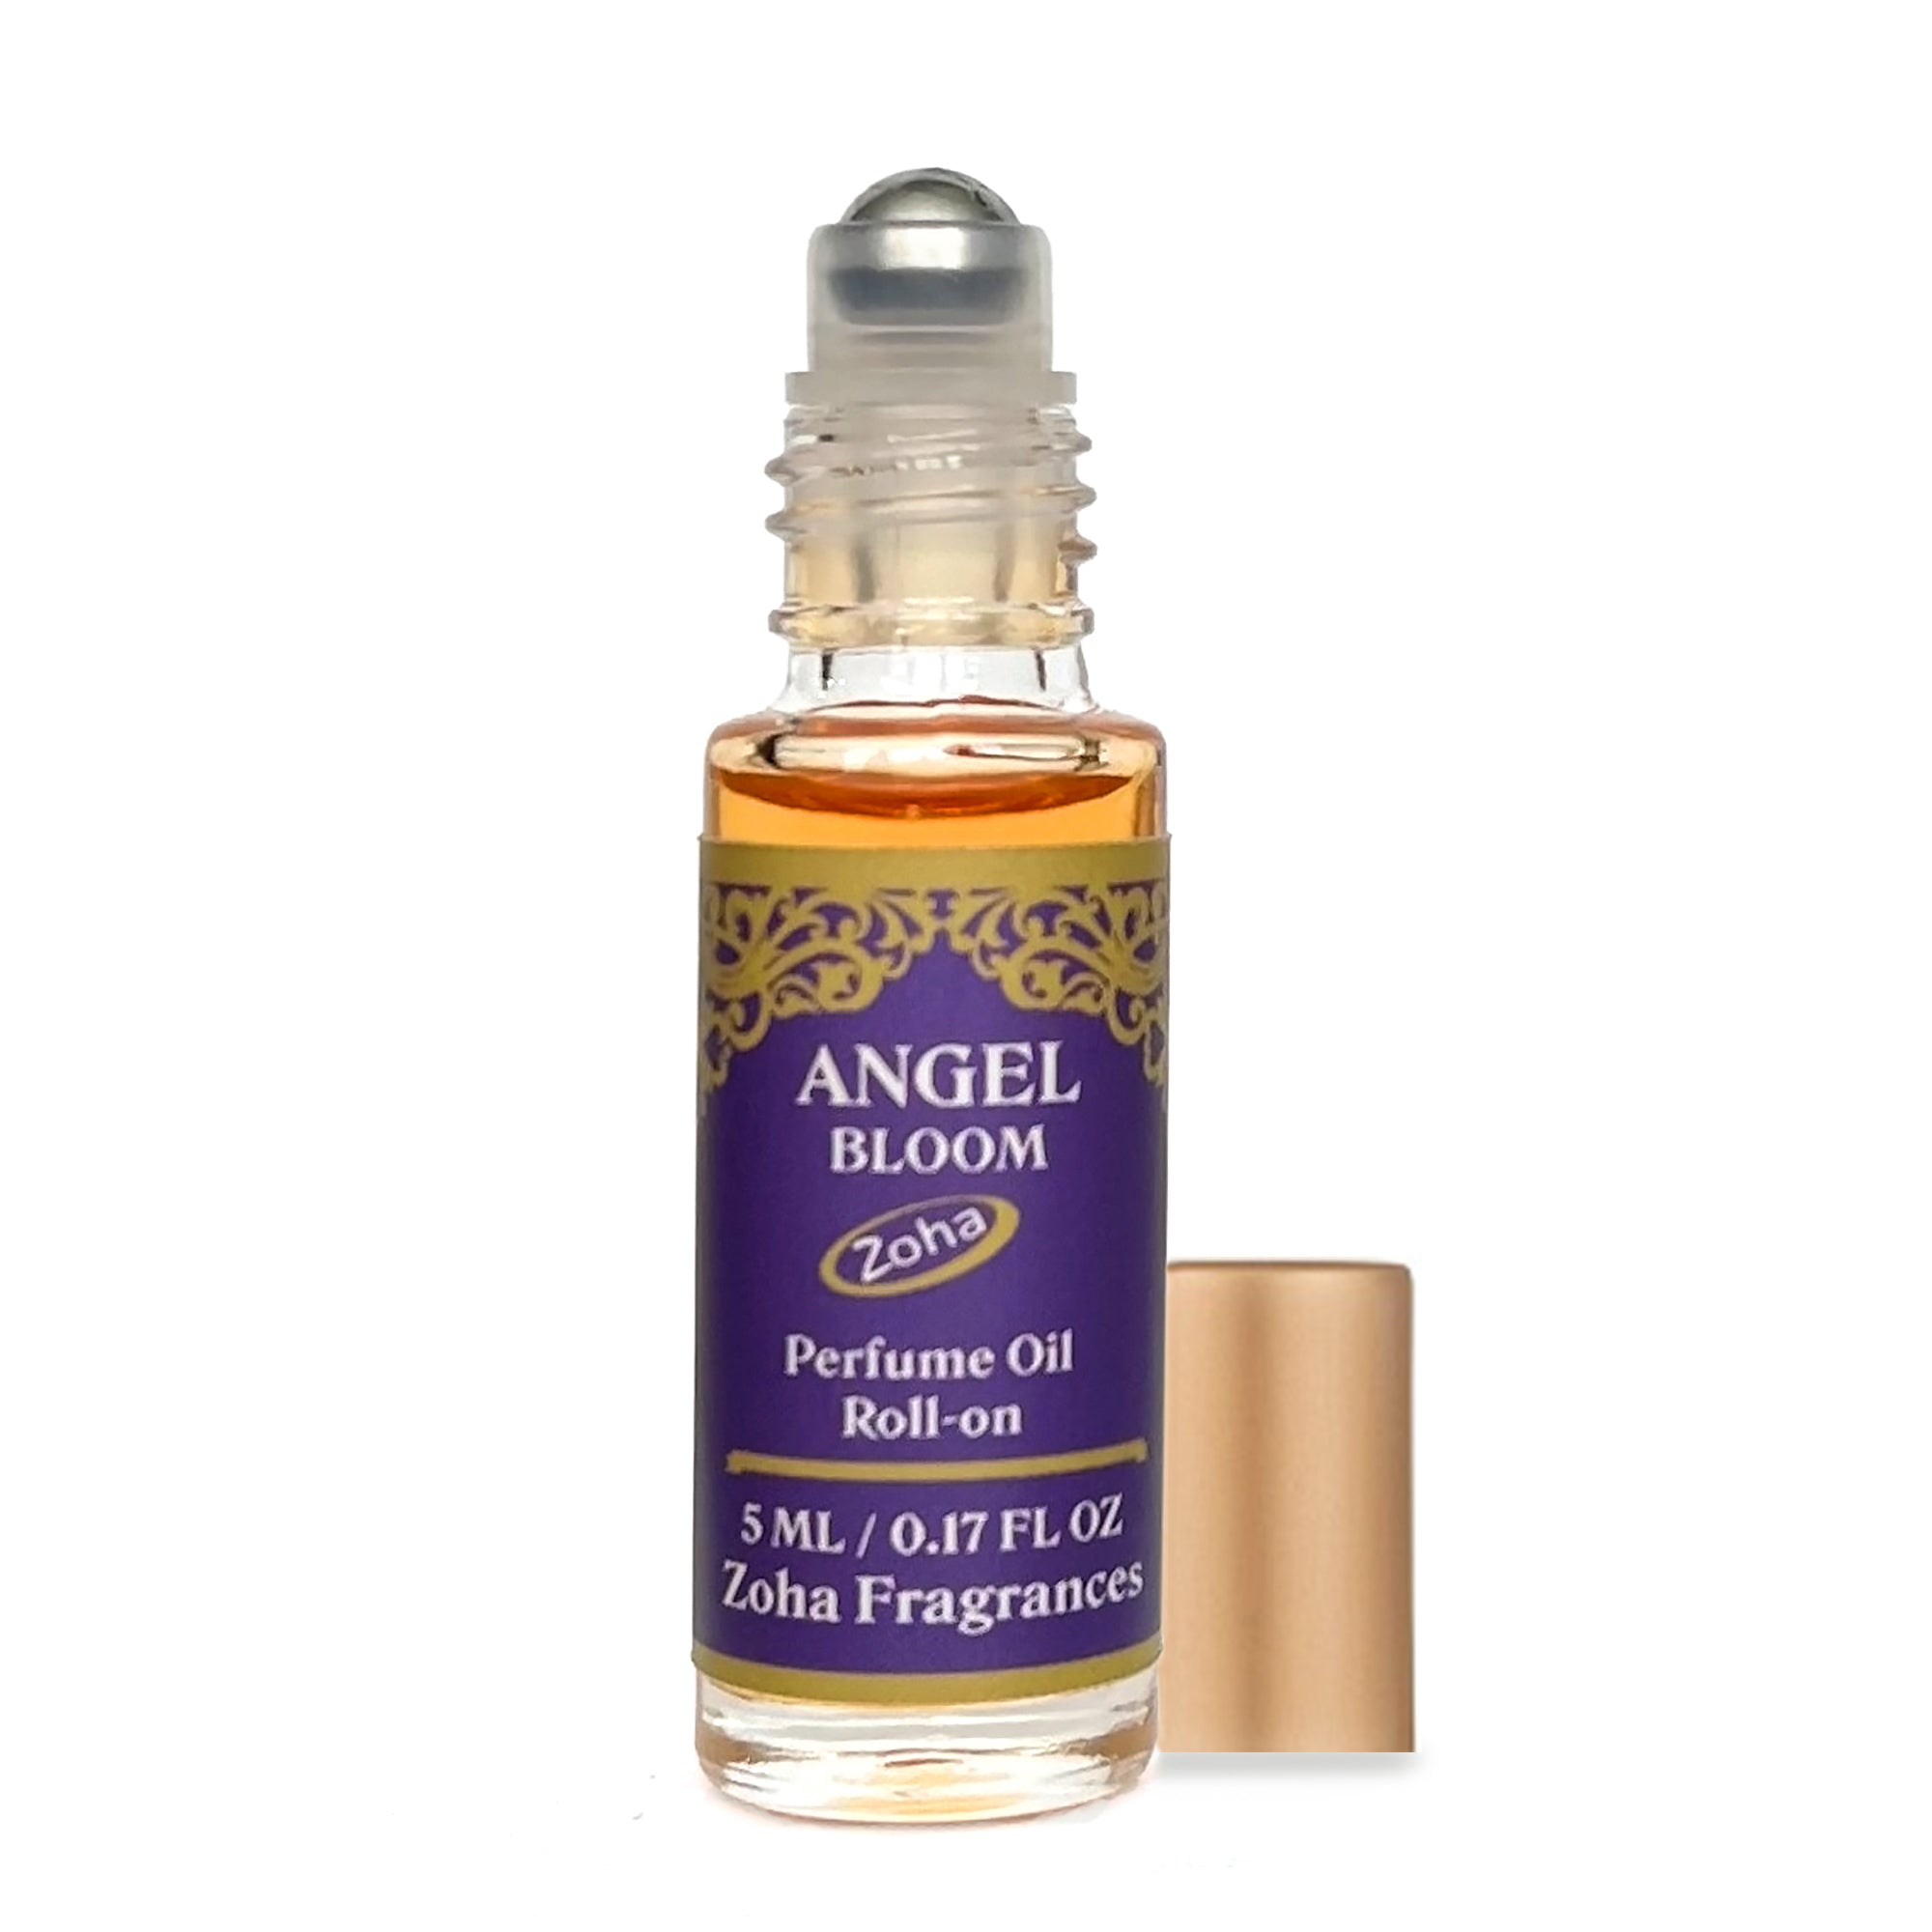 Angel Bloom Roll On Perfume for Women and Men